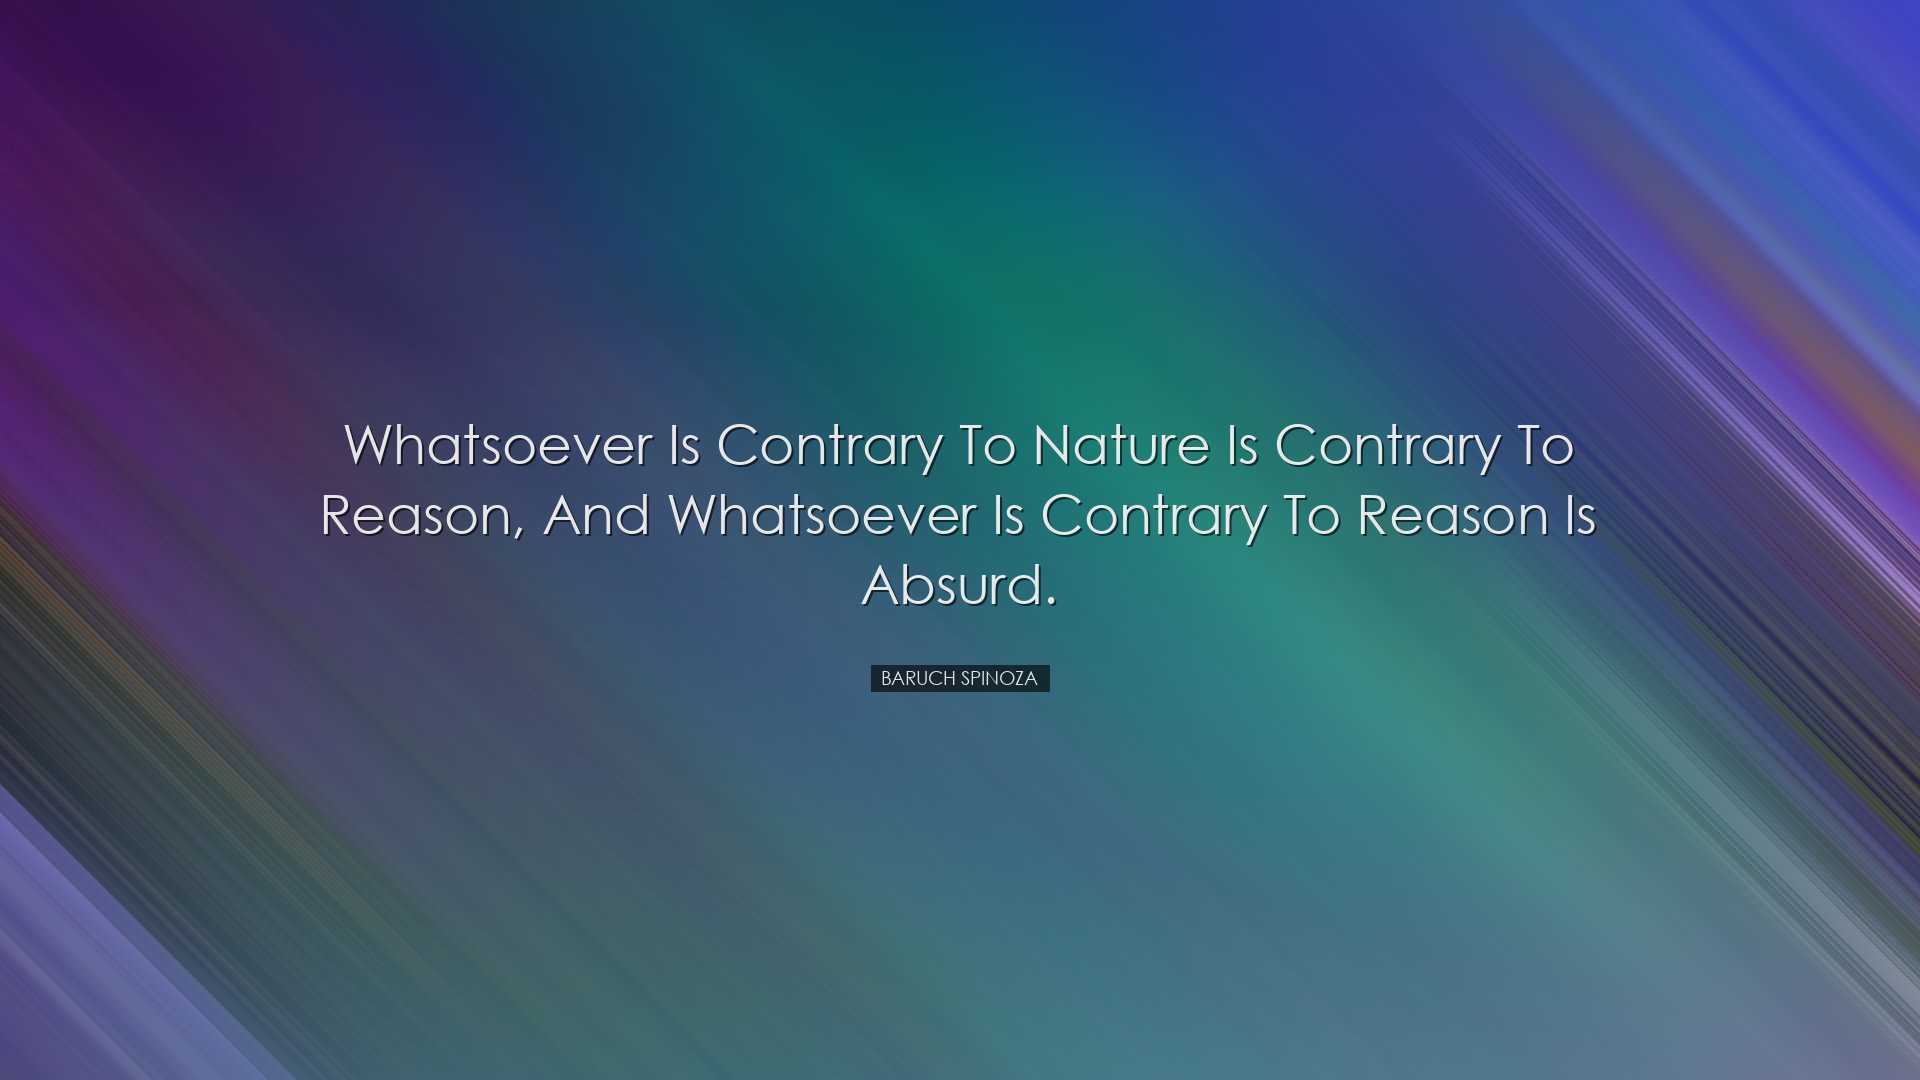 Whatsoever is contrary to nature is contrary to reason, and whatso